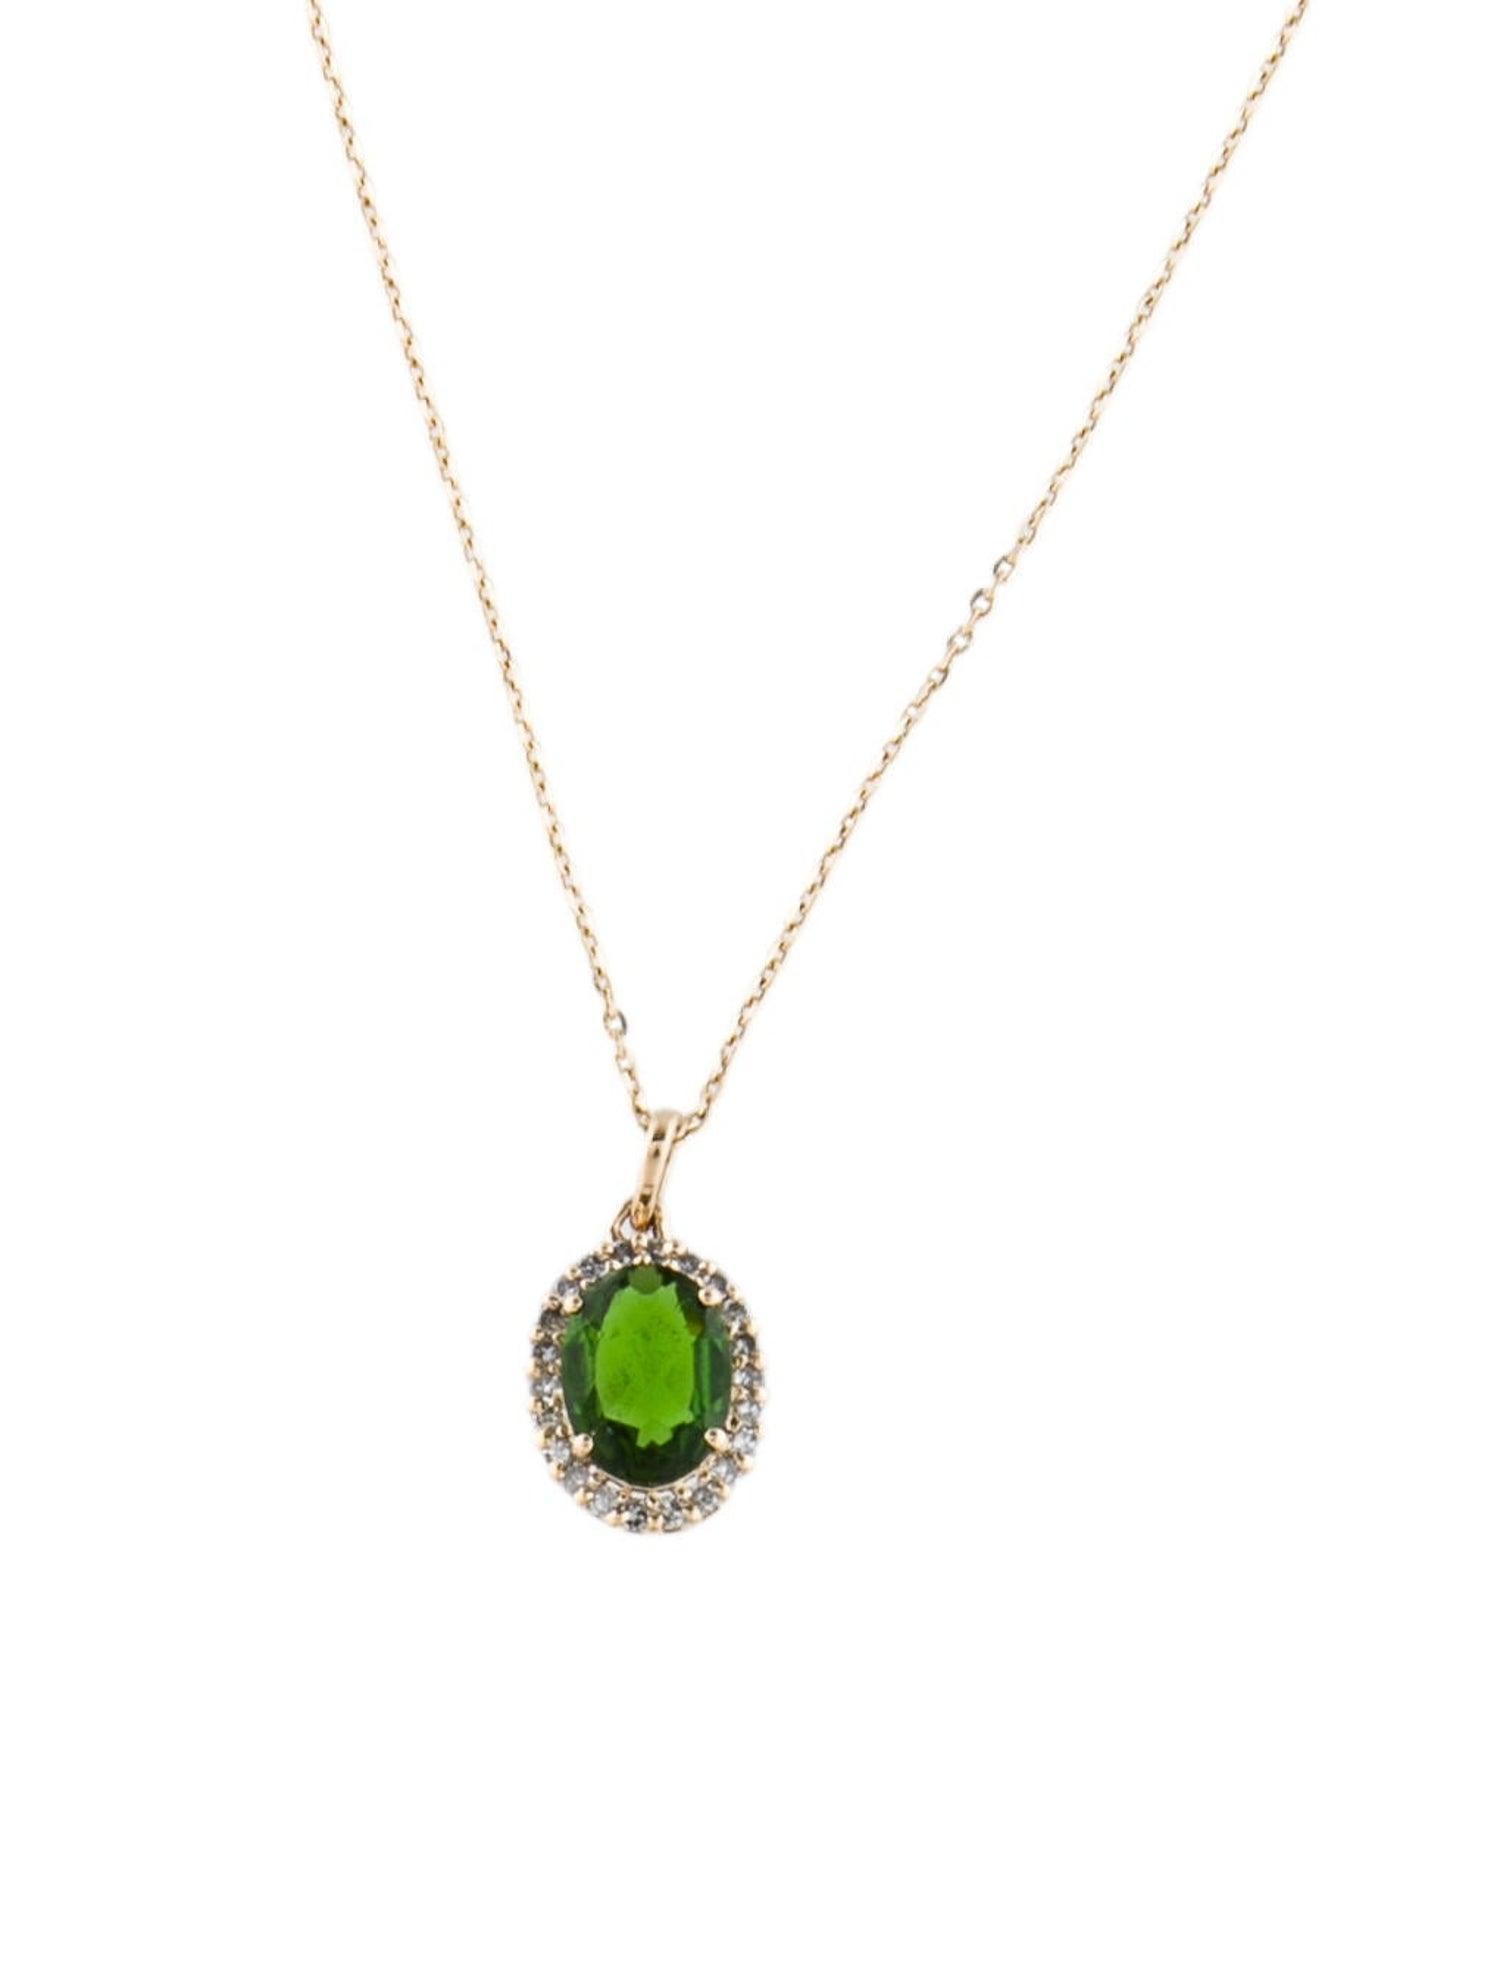 Luxury 14K Diopside & Diamond Pendant - Stunning Gemstone Statement Piece In New Condition For Sale In Holtsville, NY